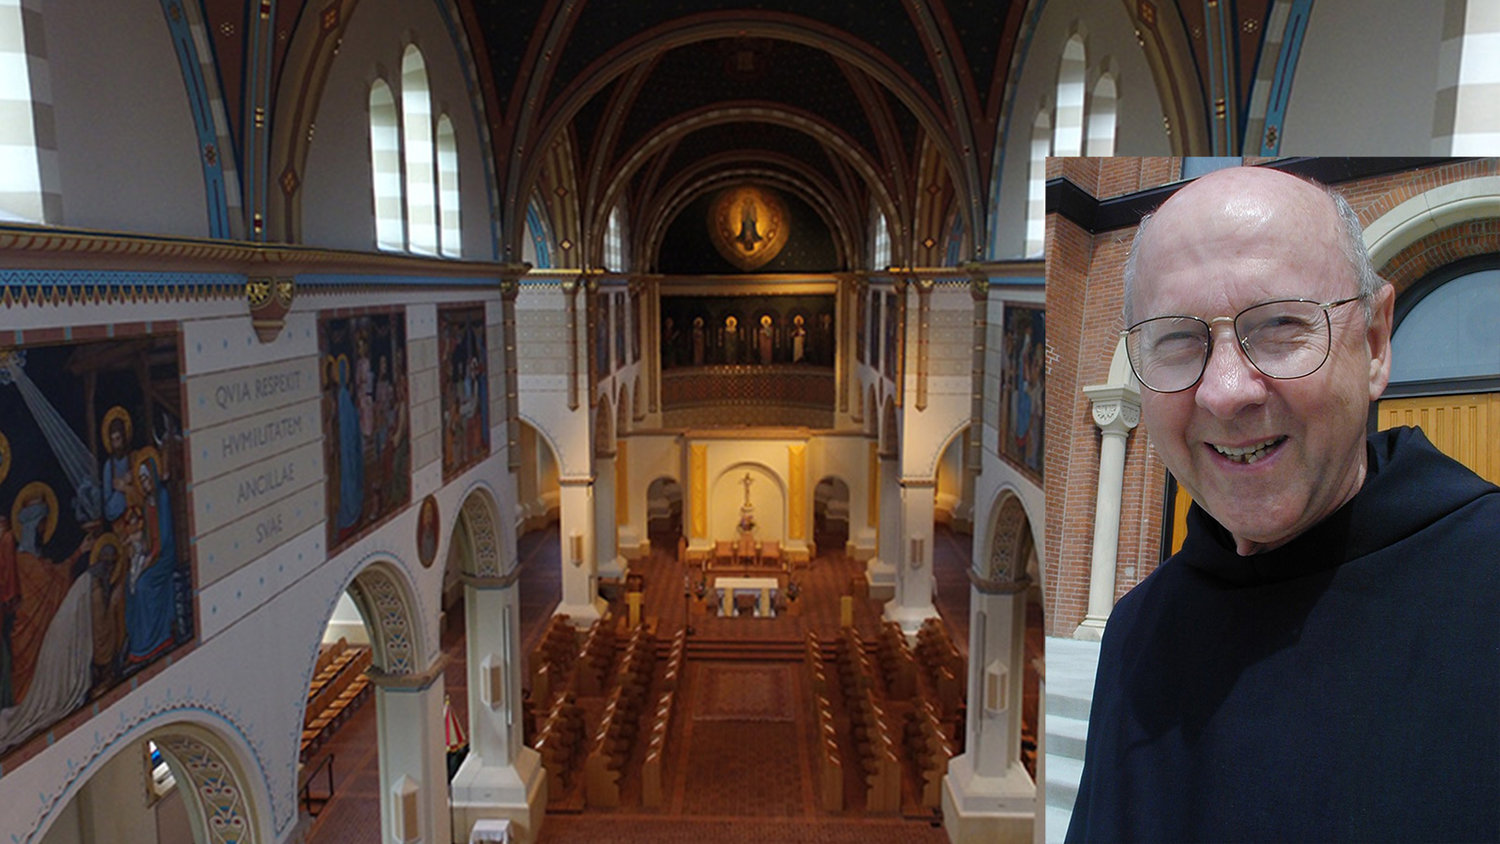 INSET PHOTO: Benedictine Father Kenneth Reichert stands outside the Basilica of the Immaculate Conception at Conception Abbey in Conception, Missouri, in this June 2003 photo, taken a year after two monks were killed and Fr. Reichert and another monk were seriously wounded in a shooting at the monastery. MAIN PHOTO: The Basilica of the Immaculate Conception at Conception Abbey in Conception, Missouri.